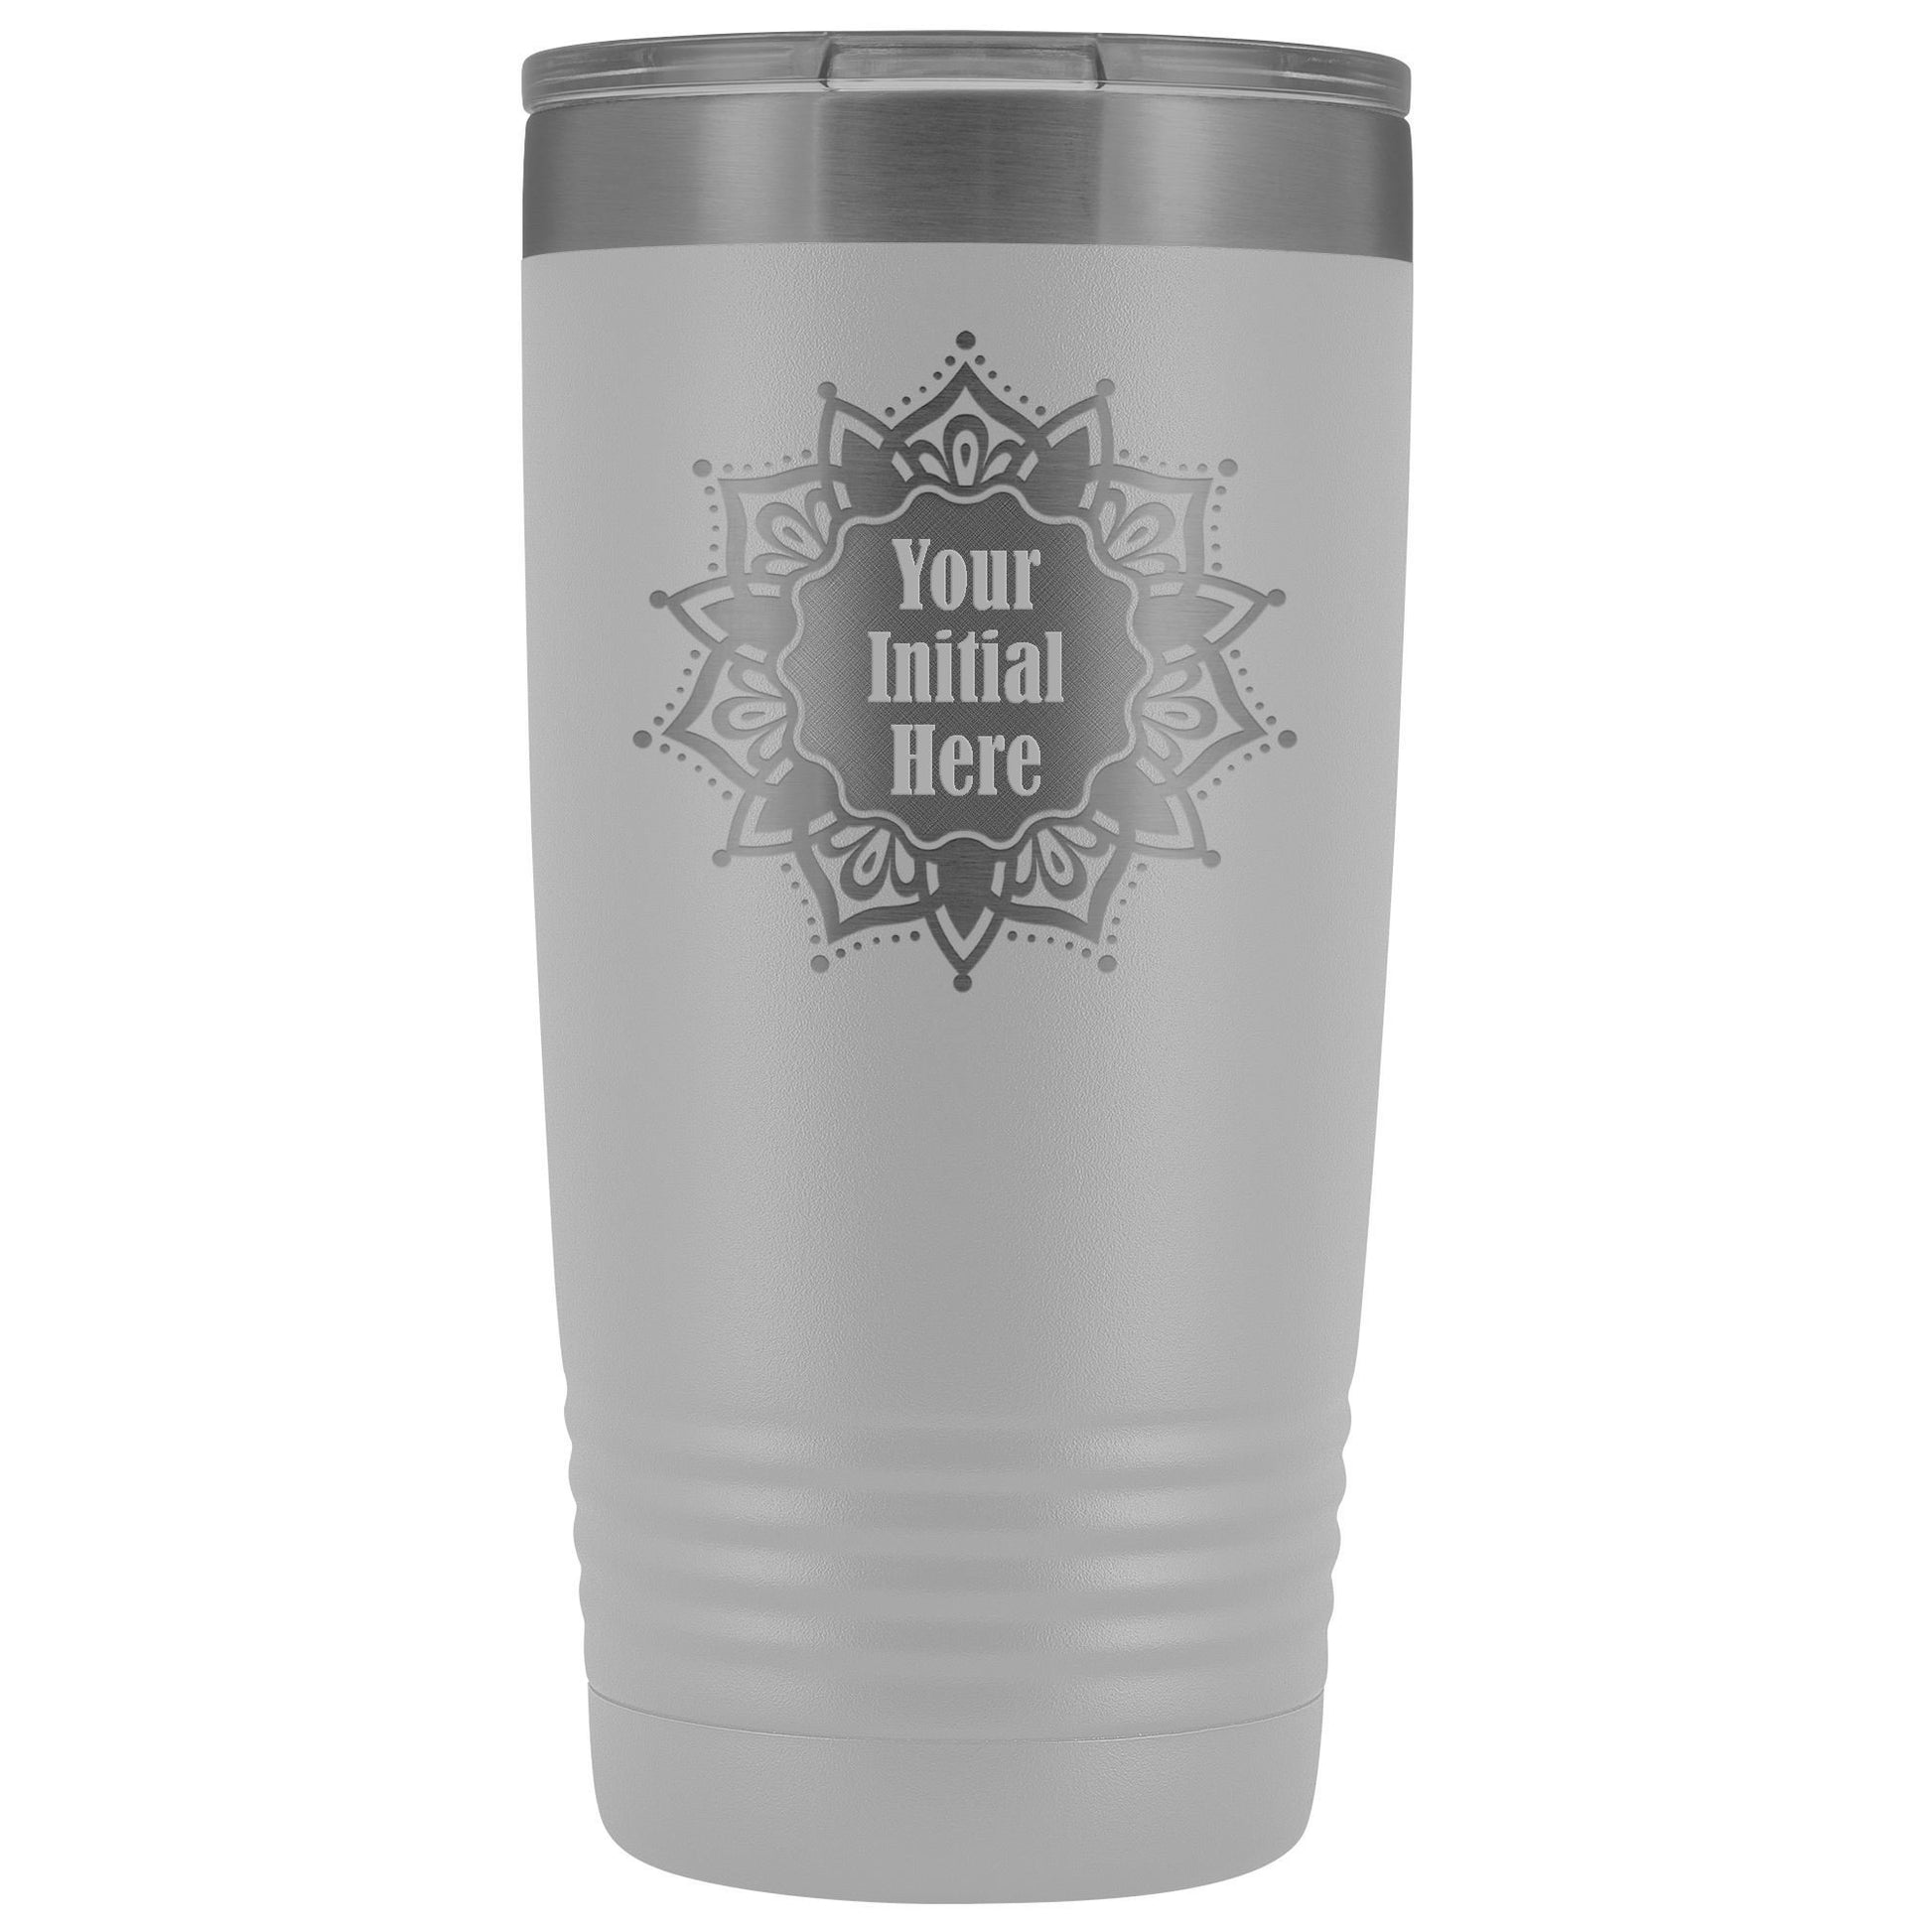 https://salmonolive.com/cdn/shop/products/white_yeti_style_insulated_travel_mug_with_name_drop_personalized_monogram_initial.jpg?v=1604433118&width=1946